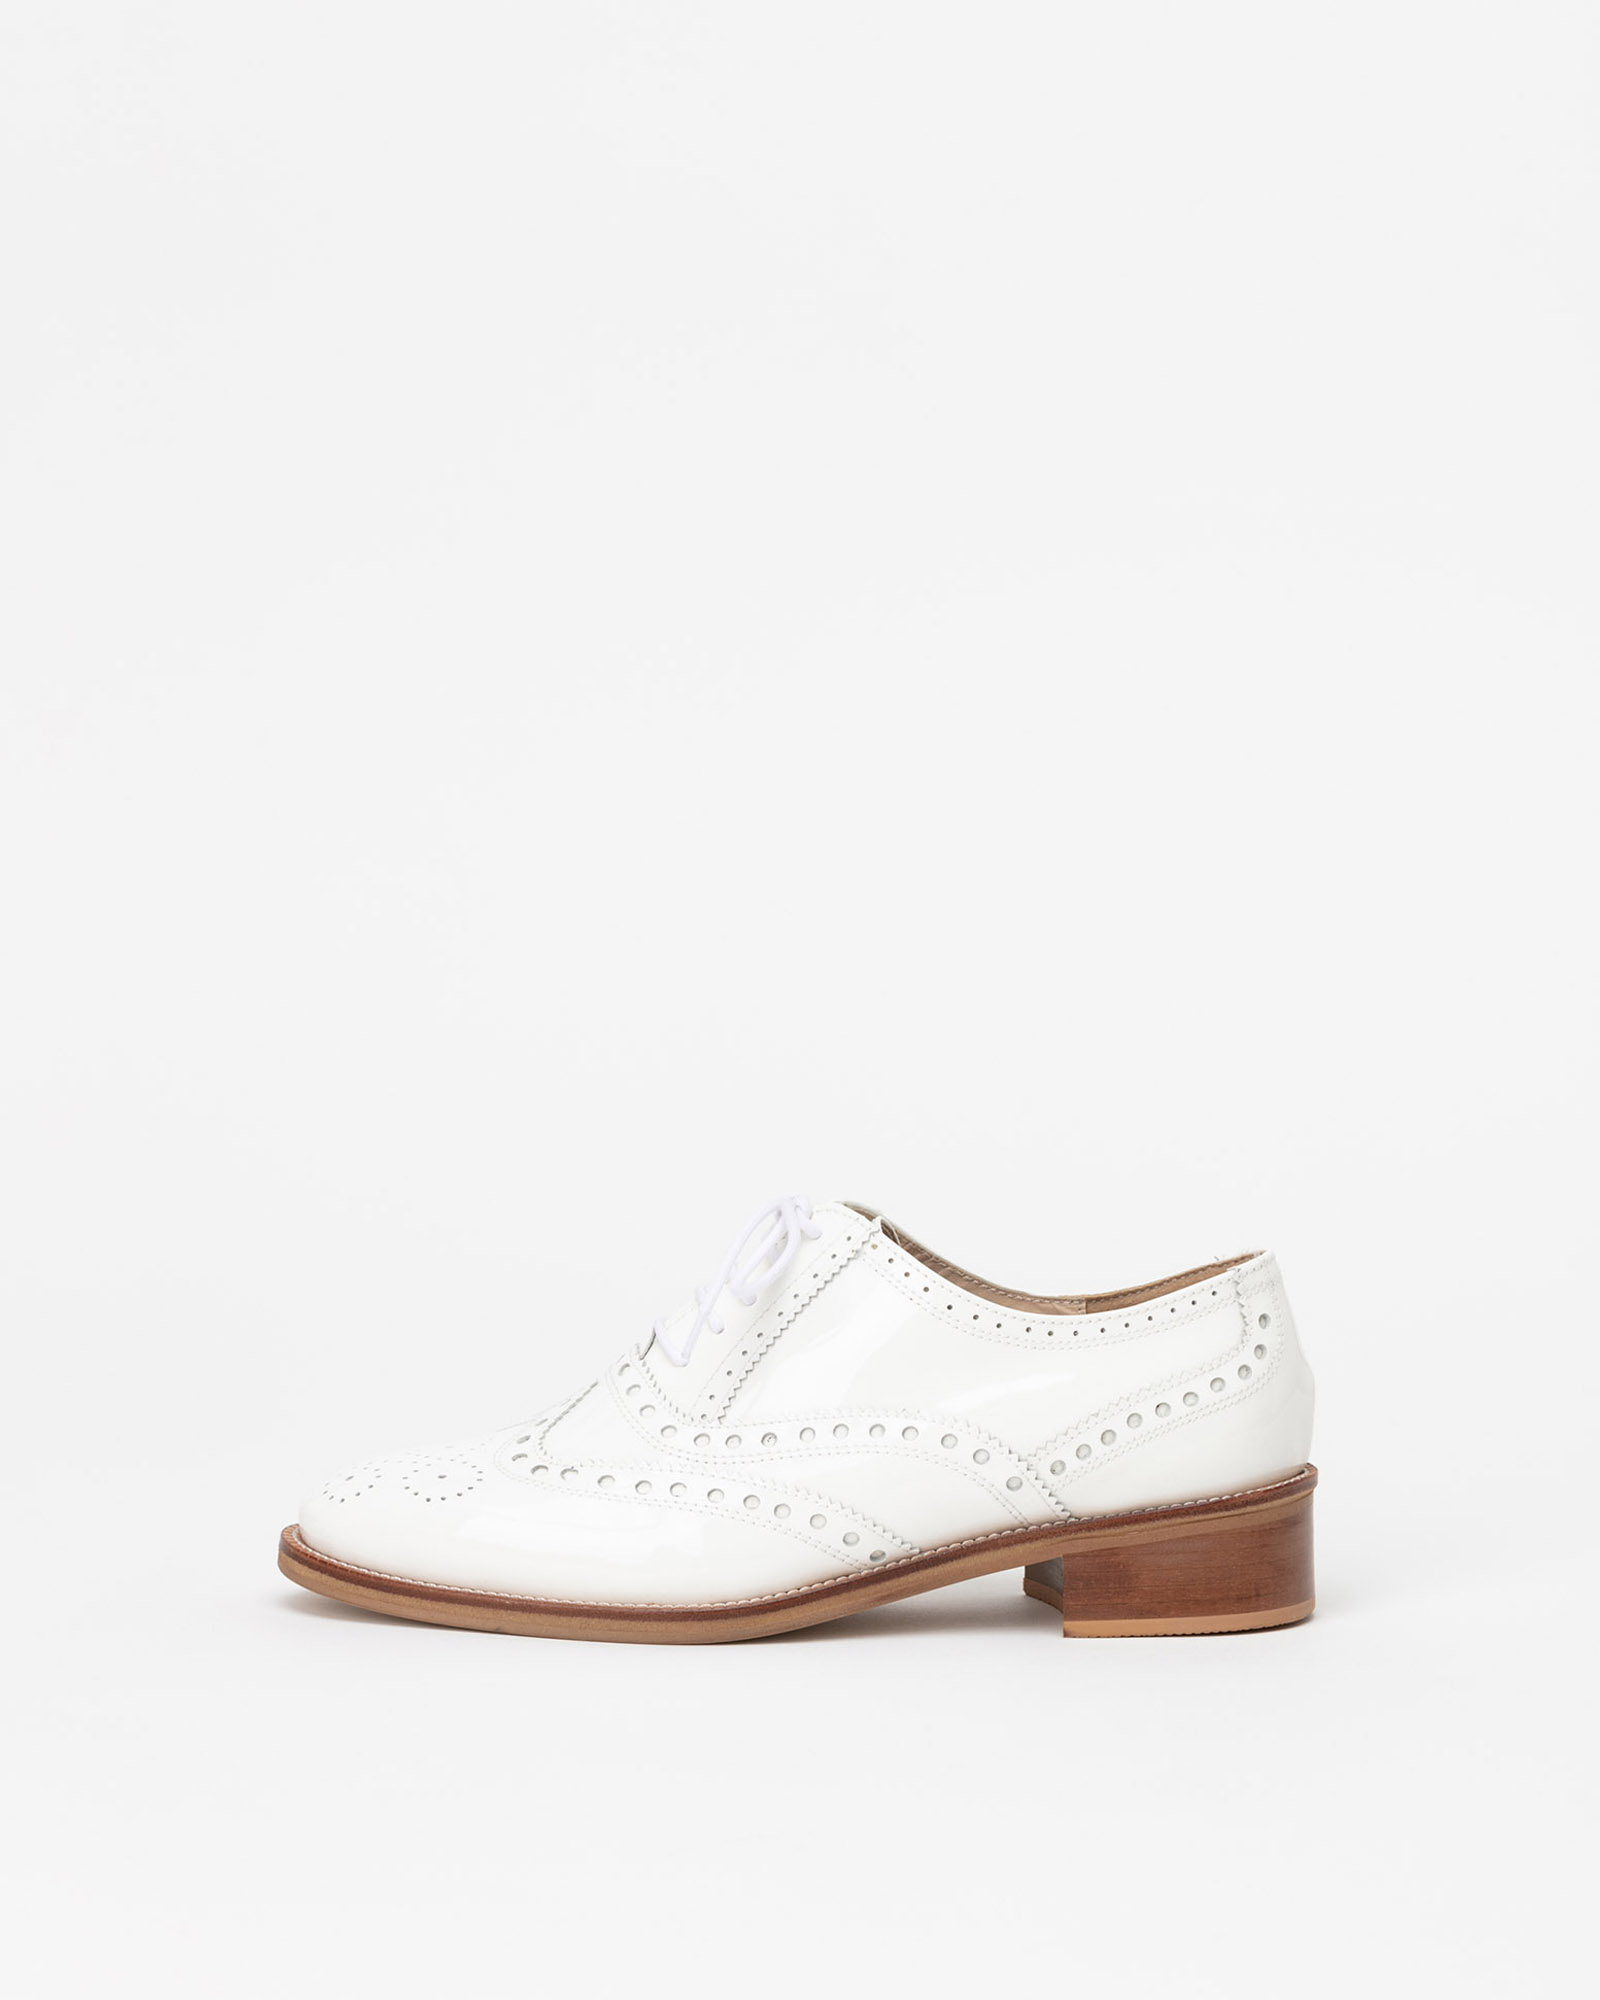 Verte Lace-up Oxford Loafers